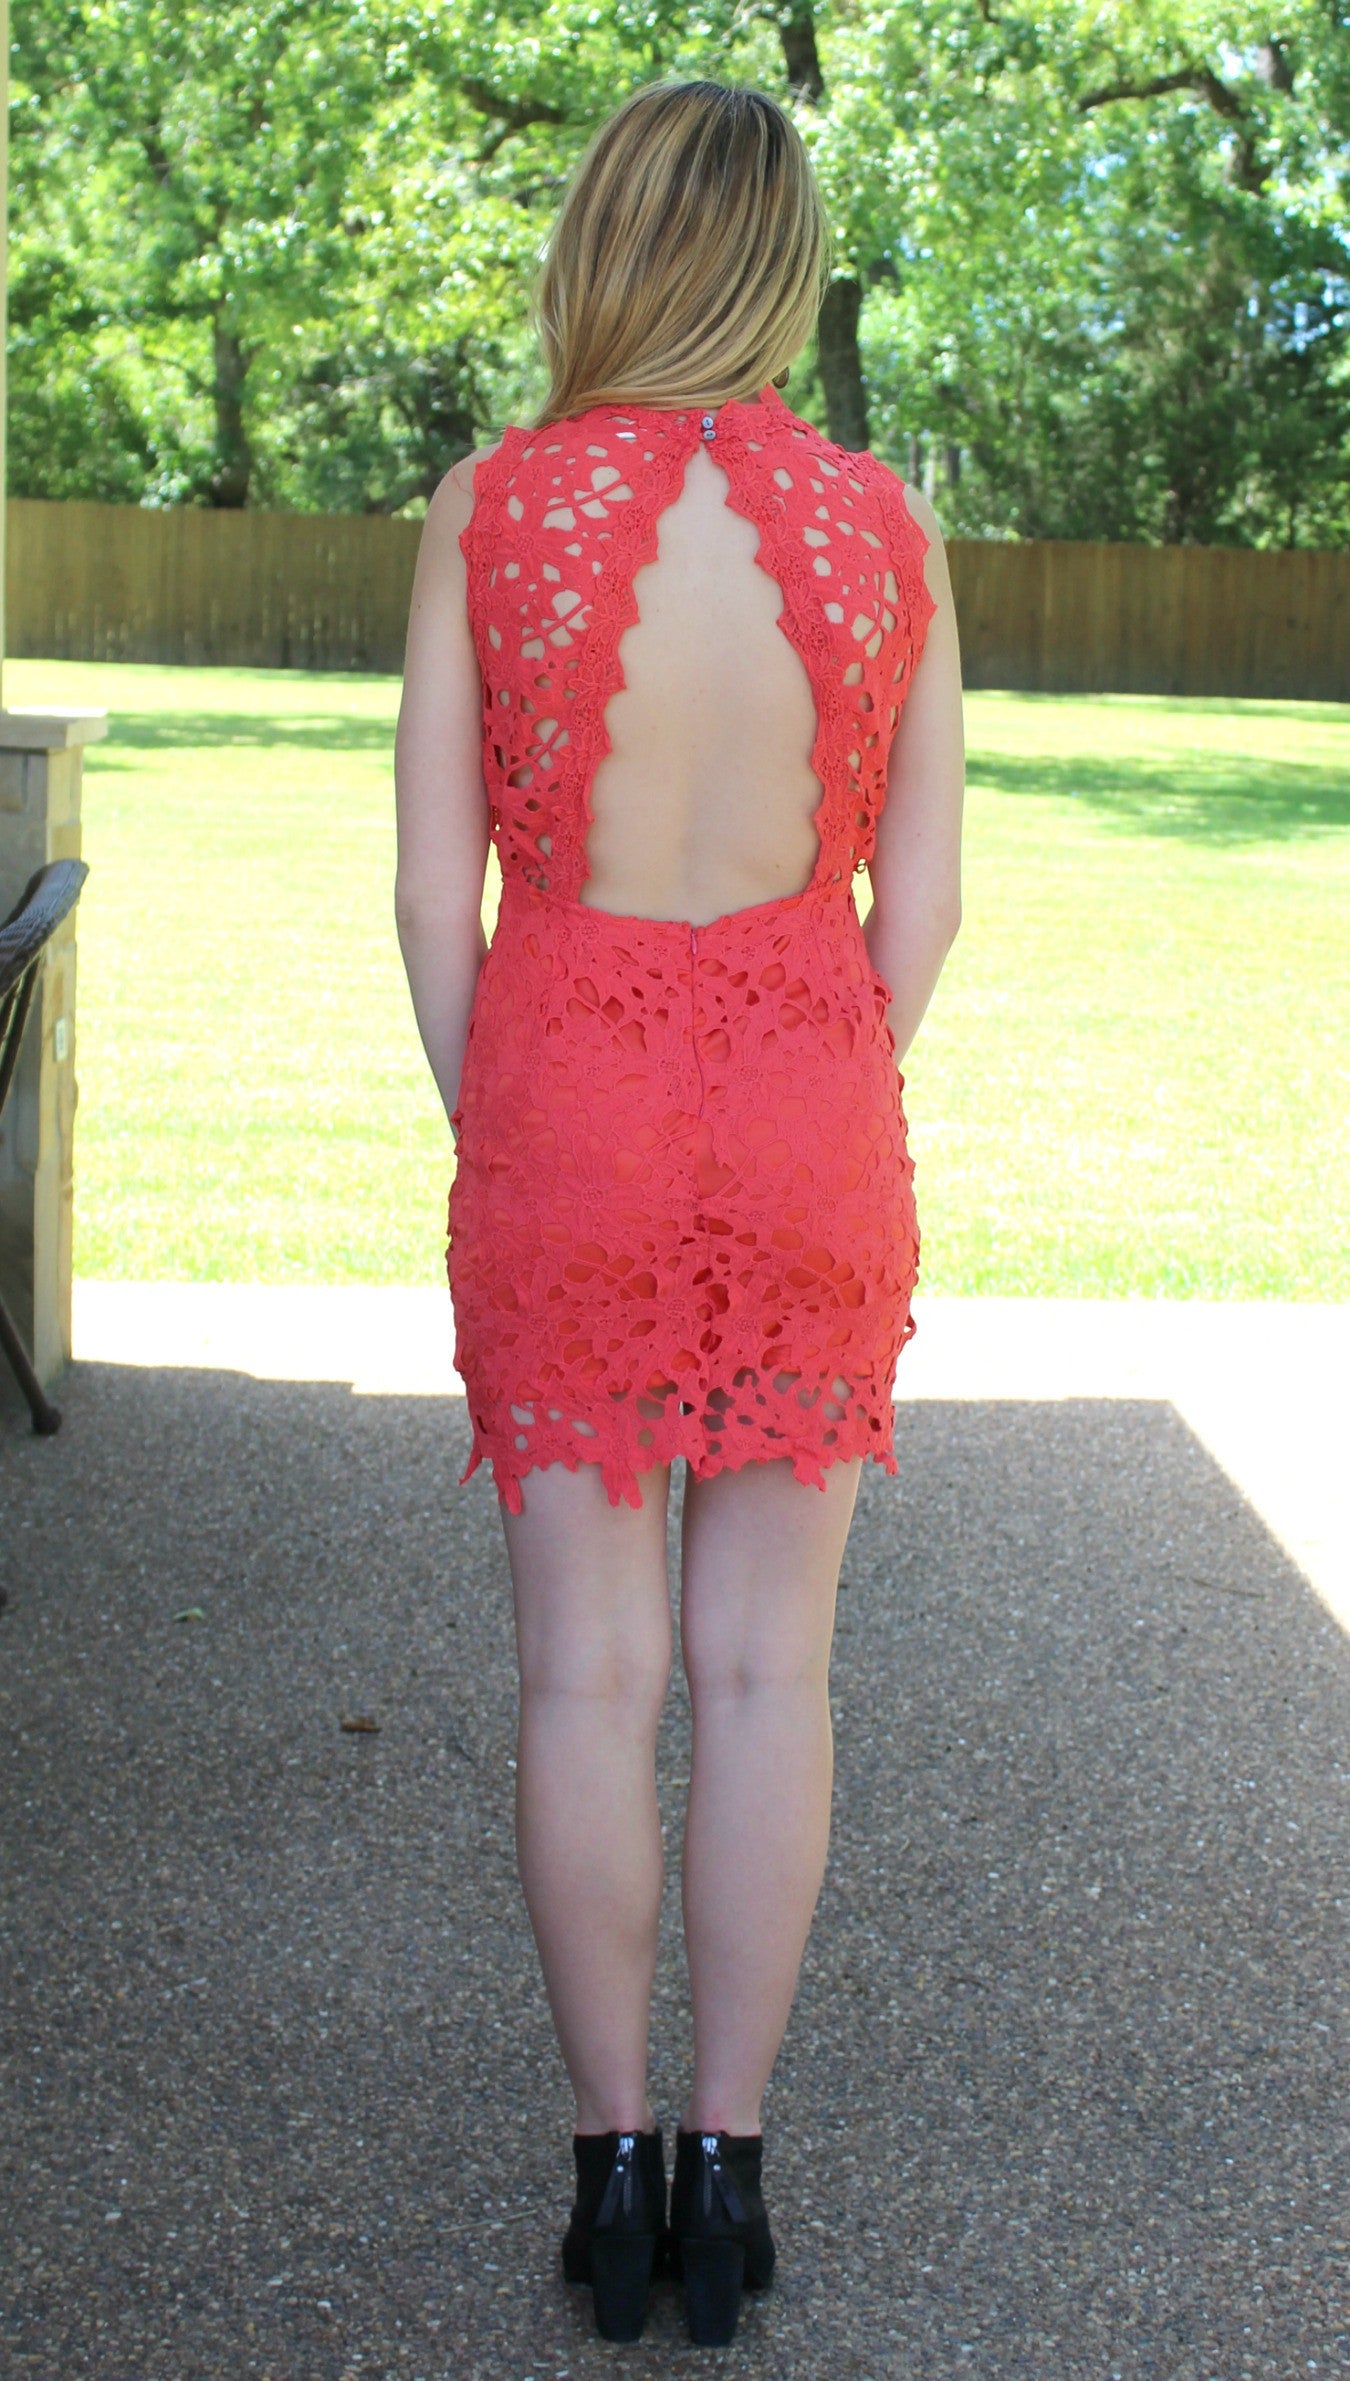 Last Chance Size Large | Quick To Stare Crochet Dress in Coral - Giddy Up Glamour Boutique